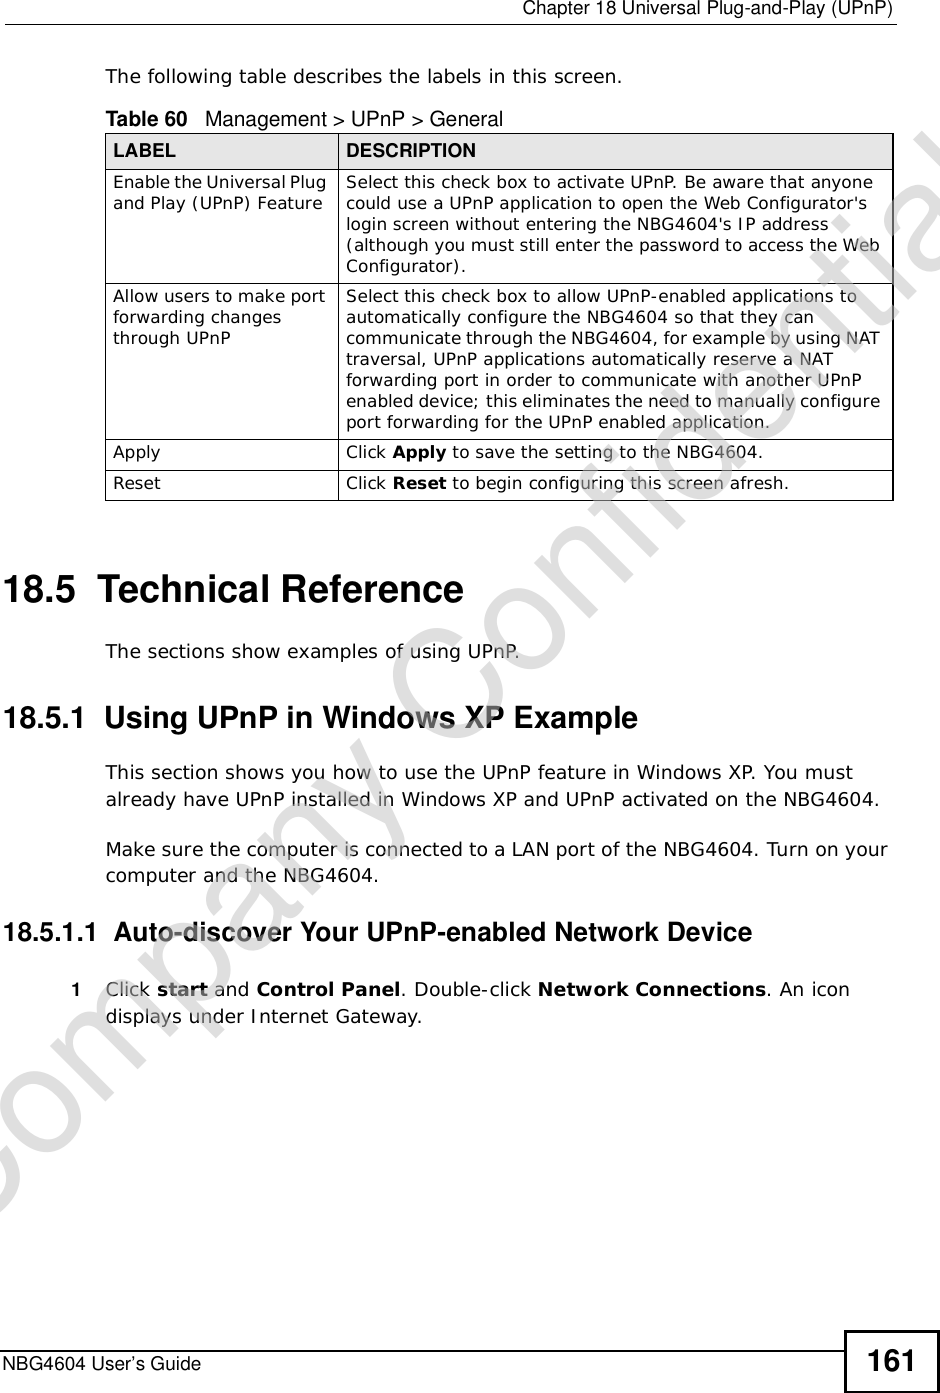  Chapter 18Universal Plug-and-Play (UPnP)NBG4604 User’s Guide 161The following table describes the labels in this screen. 18.5  Technical ReferenceThe sections show examples of using UPnP.  18.5.1  Using UPnP in Windows XP ExampleThis section shows you how to use the UPnP feature in Windows XP. You must already have UPnP installed in Windows XP and UPnP activated on the NBG4604.Make sure the computer is connected to a LAN port of the NBG4604. Turn on your computer and the NBG4604. 18.5.1.1  Auto-discover Your UPnP-enabled Network Device1Click start and Control Panel. Double-click Network Connections. An icon displays under Internet Gateway.Table 60   Management &gt; UPnP &gt; GeneralLABEL DESCRIPTIONEnable the Universal Plug and Play (UPnP) Feature Select this check box to activate UPnP. Be aware that anyone could use a UPnP application to open the Web Configurator&apos;s login screen without entering the NBG4604&apos;s IP address (although you must still enter the password to access the Web Configurator).Allow users to make port forwarding changes through UPnPSelect this check box to allow UPnP-enabled applications to automatically configure the NBG4604 so that they can communicate through the NBG4604, for example by using NAT traversal, UPnP applications automatically reserve a NAT forwarding port in order to communicate with another UPnP enabled device; this eliminates the need to manually configure port forwarding for the UPnP enabled application. Apply Click Apply to save the setting to the NBG4604.Reset Click Reset to begin configuring this screen afresh.Company Confidential